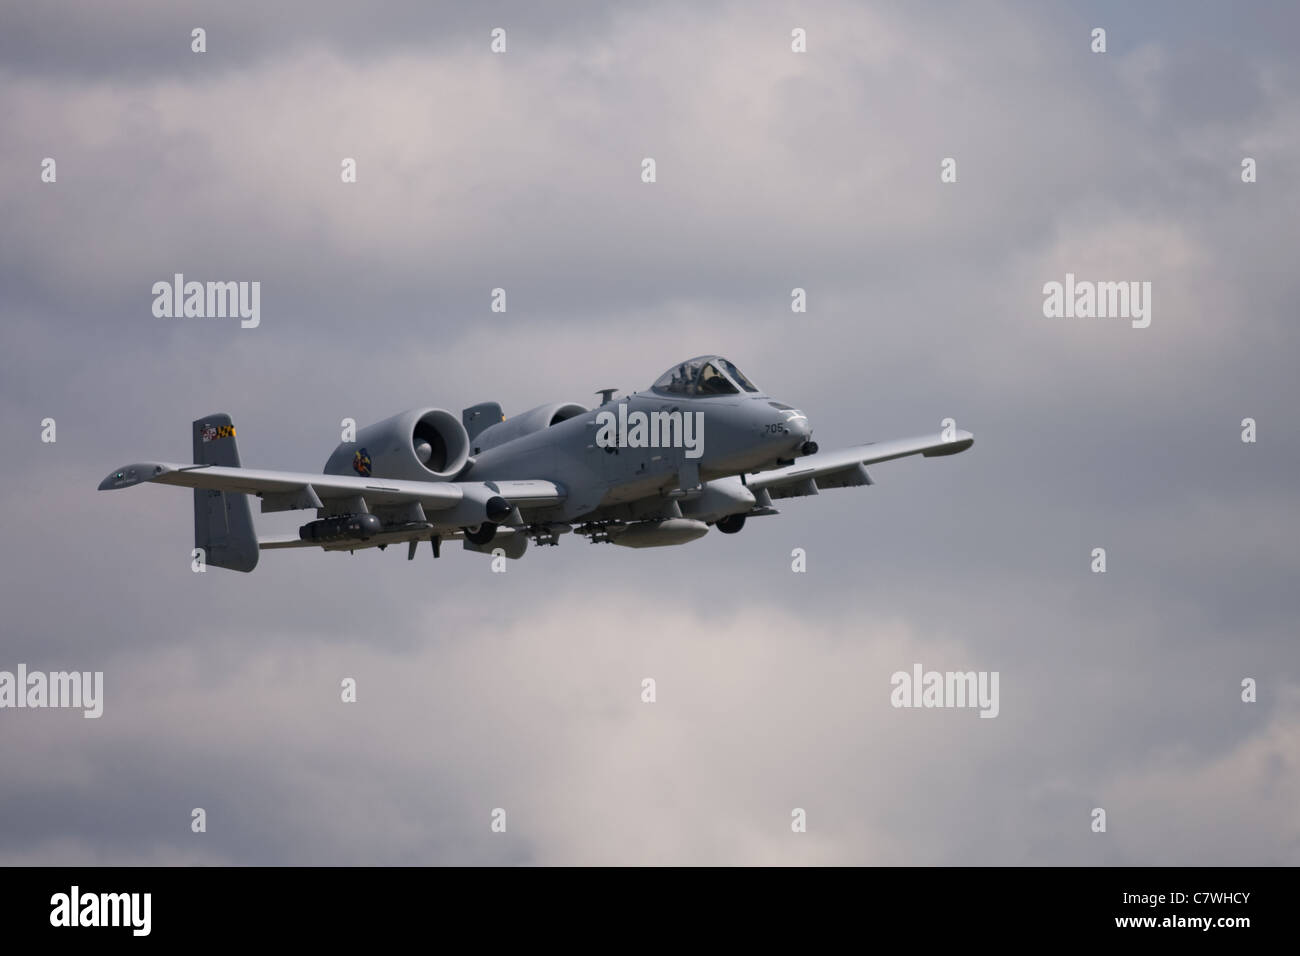 June 26, 2011. St. Thomas Ontario Canada. A United States A-10C Thunderbolt II in flight at the Great Lakes International Air Sh Stock Photo